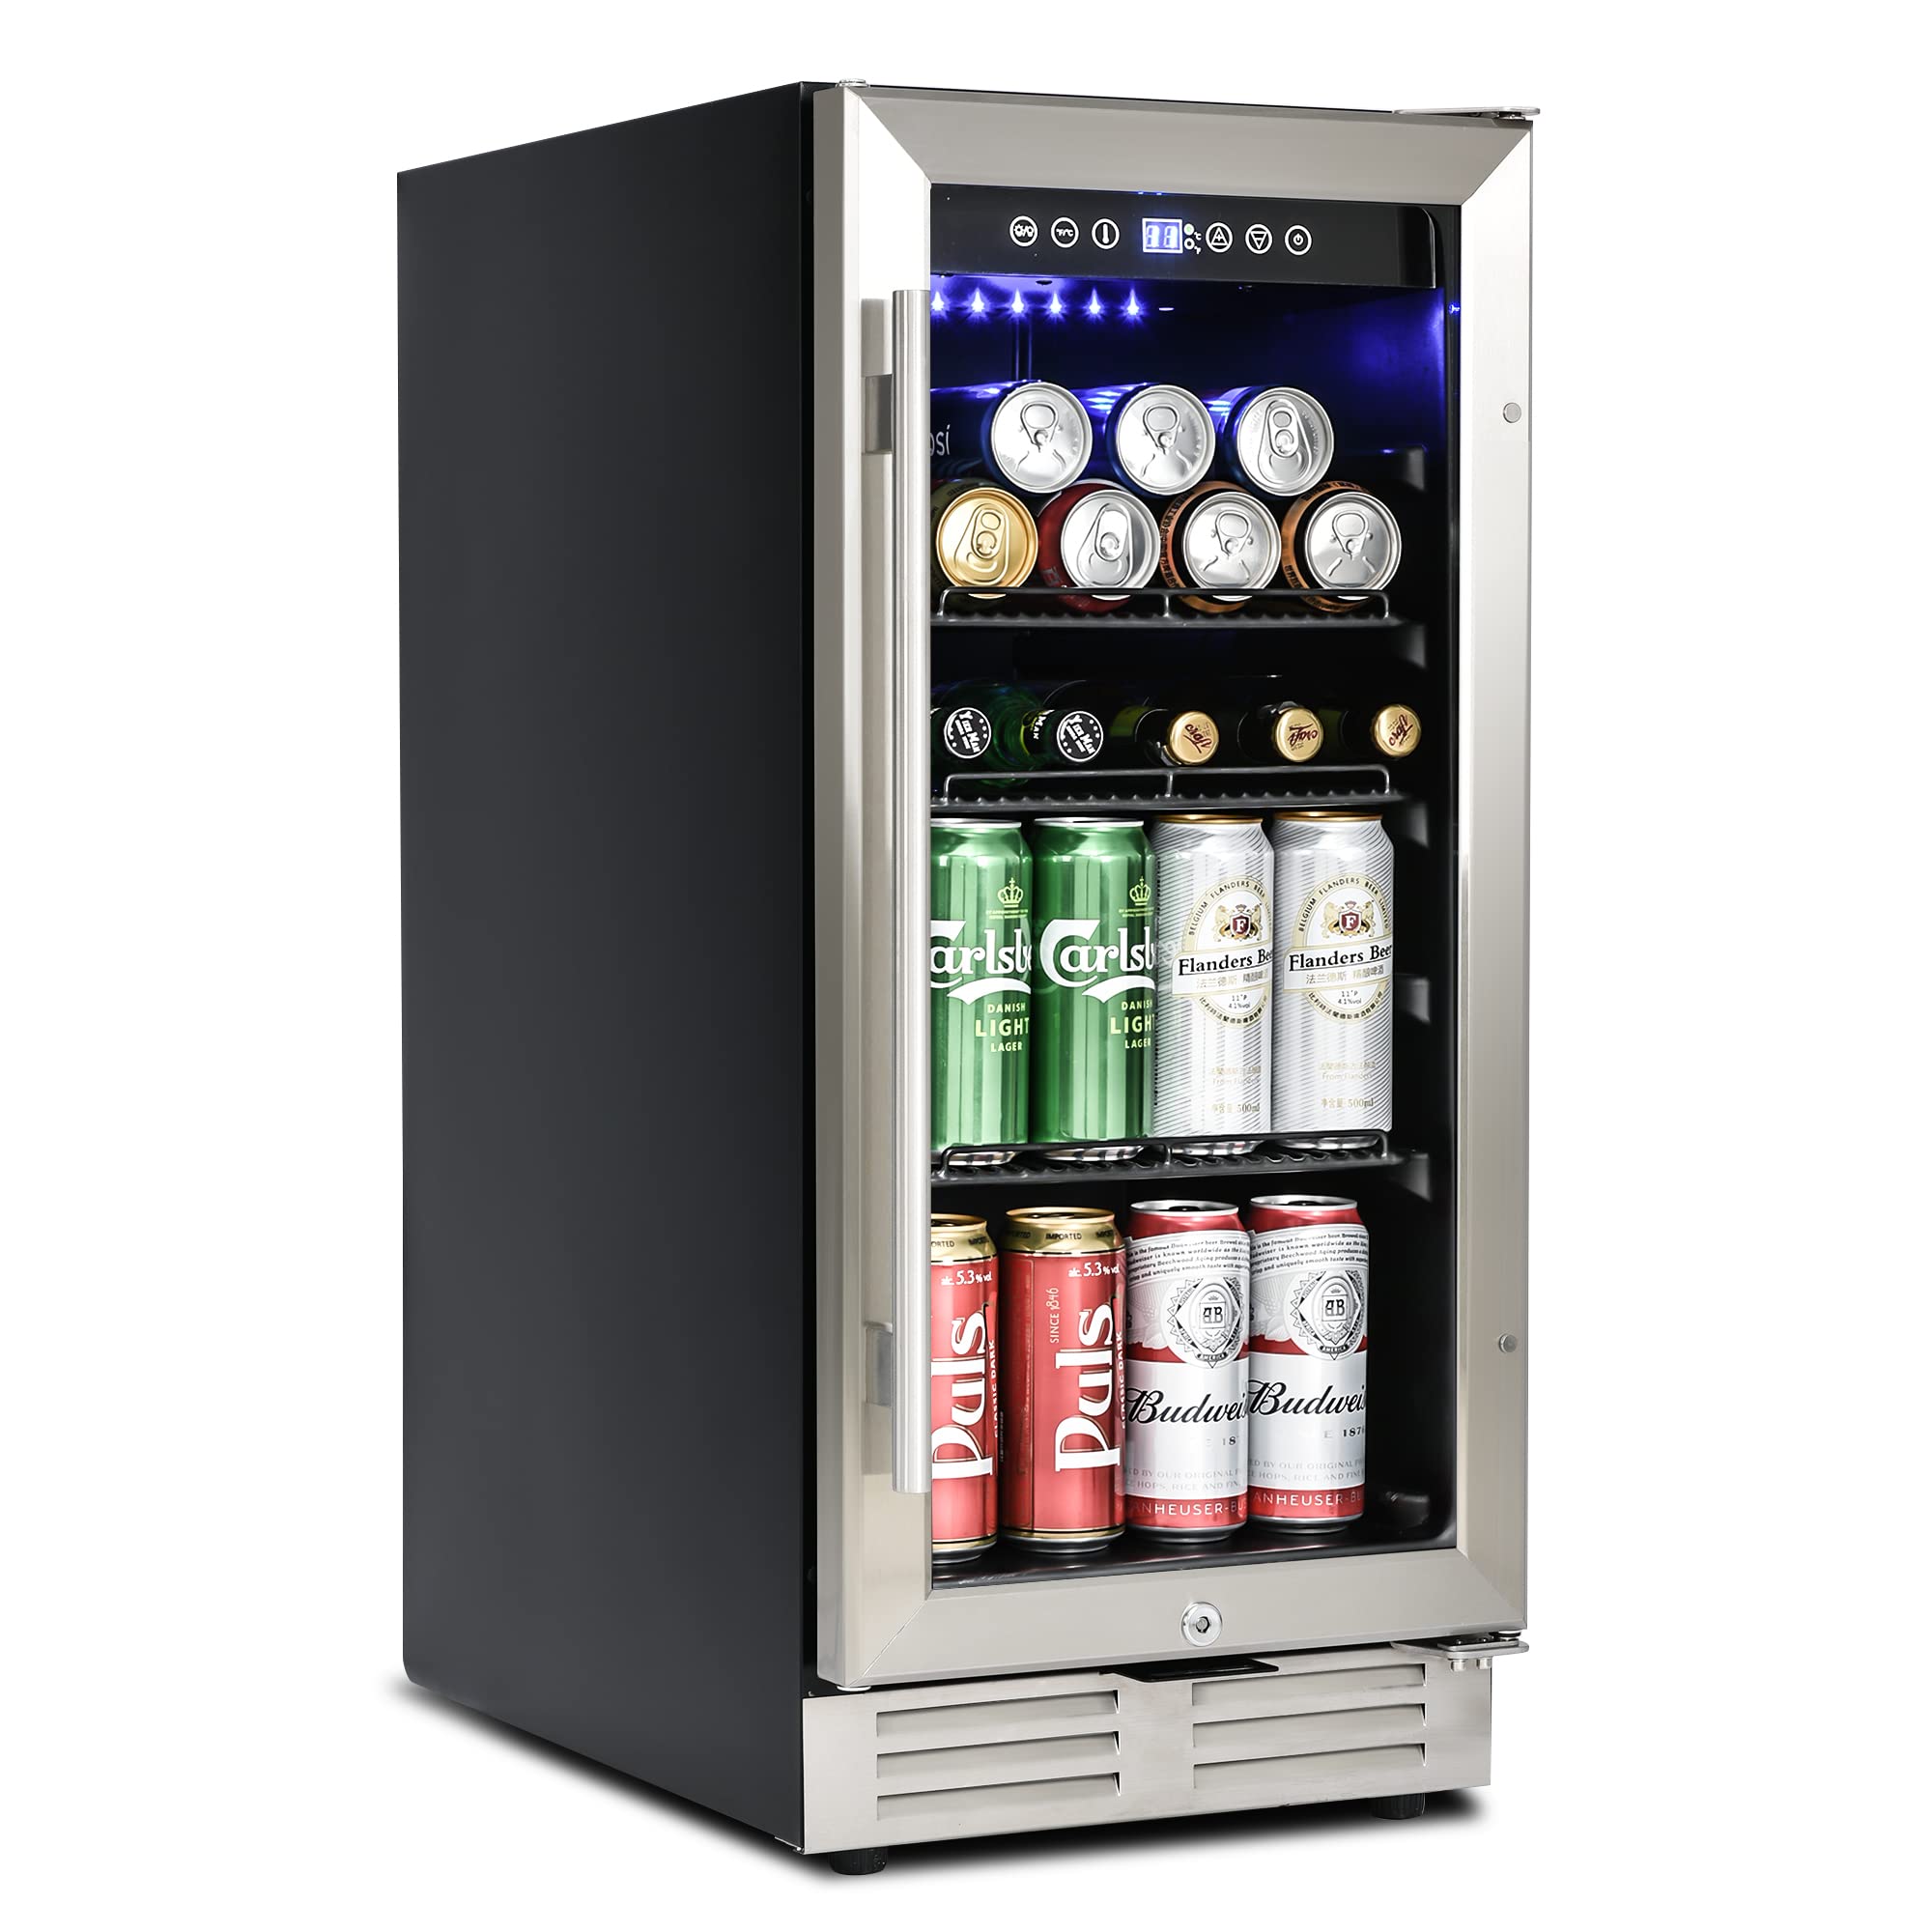 LUMISOL 15 Beverage Refrigerator, Mini cooler Under counter Built-in or Freestanding, 120 cans capacity Wine cabinet with Blue I